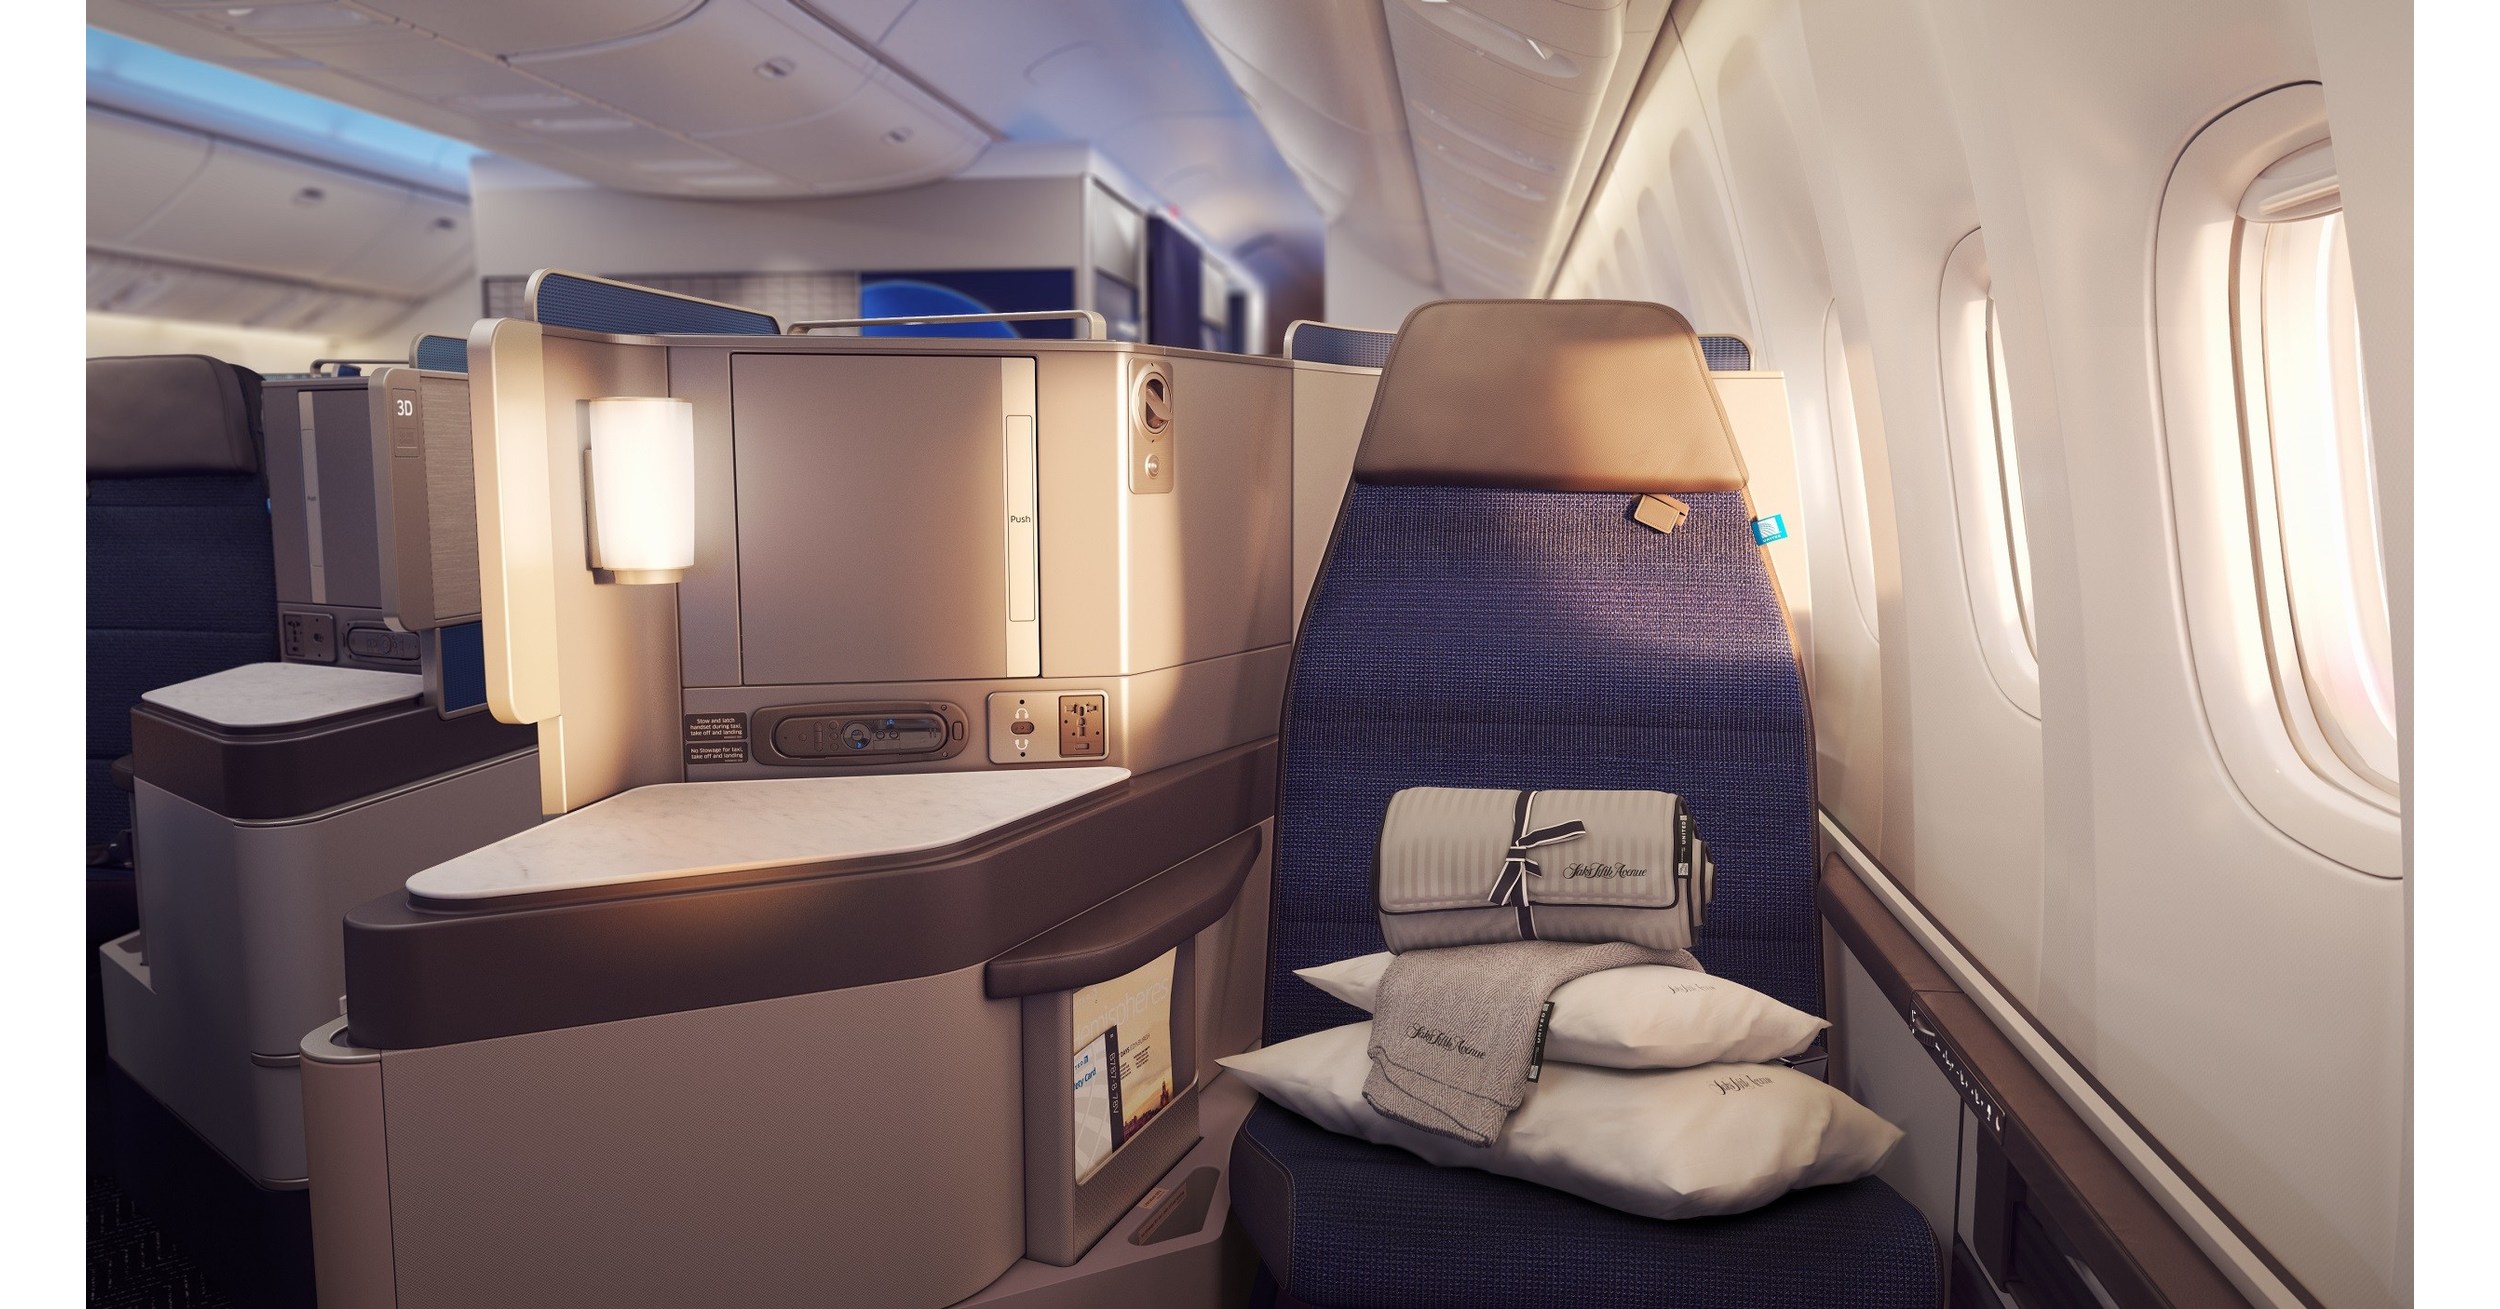 United Airlines Introduces Boeing 777